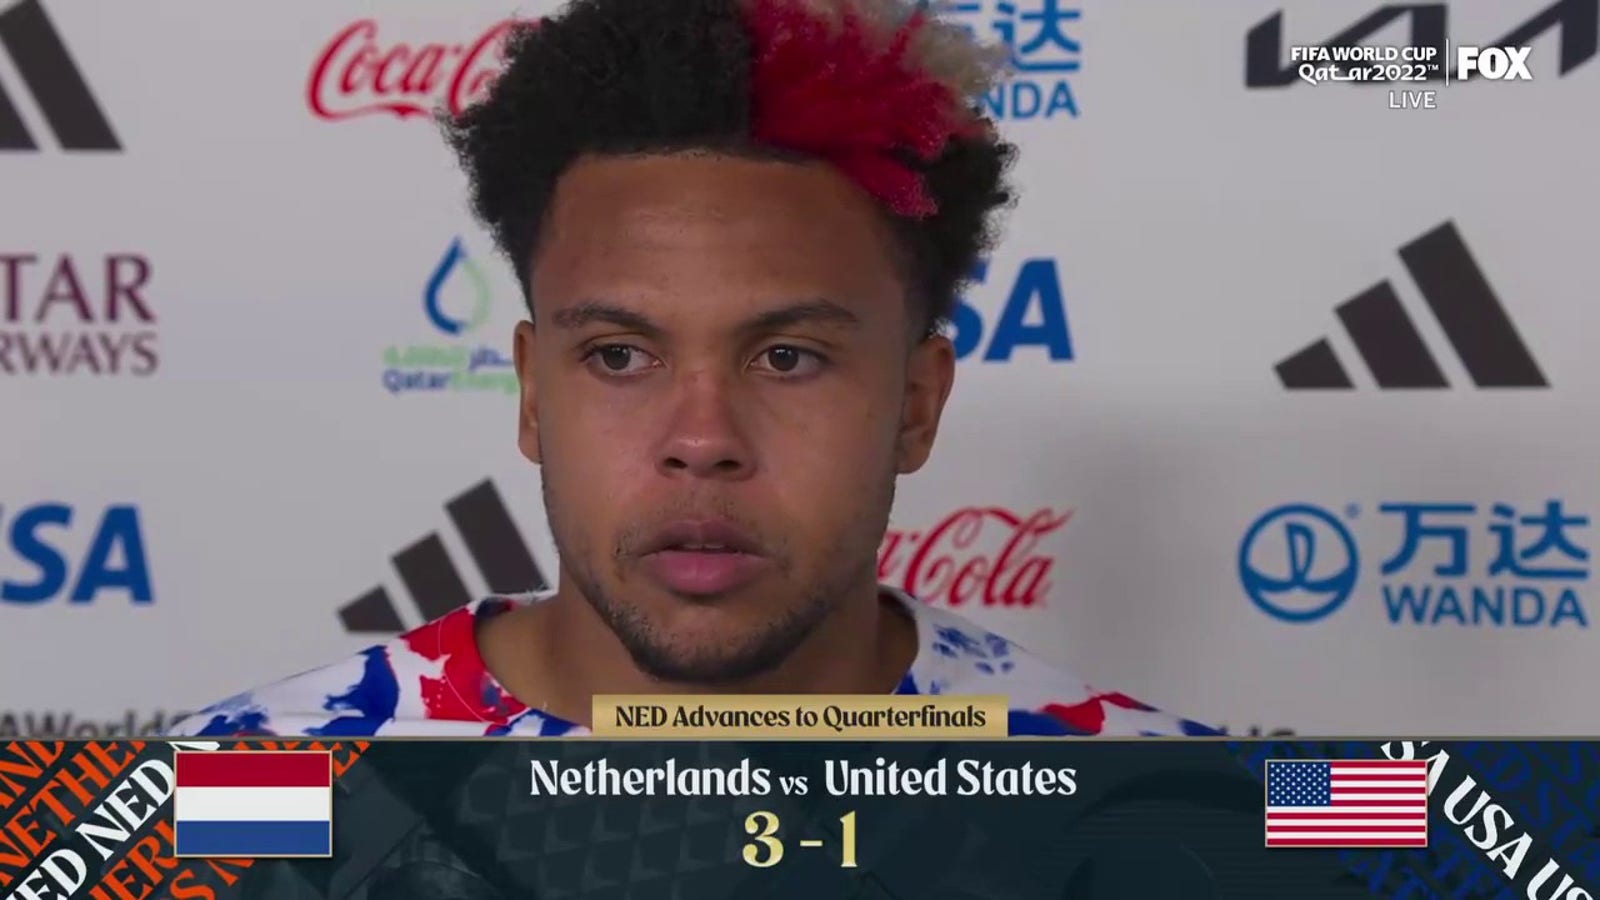 'We didn't want the journey to end' - an emotional Weston McKennie discusses USMNT mindset moving forward